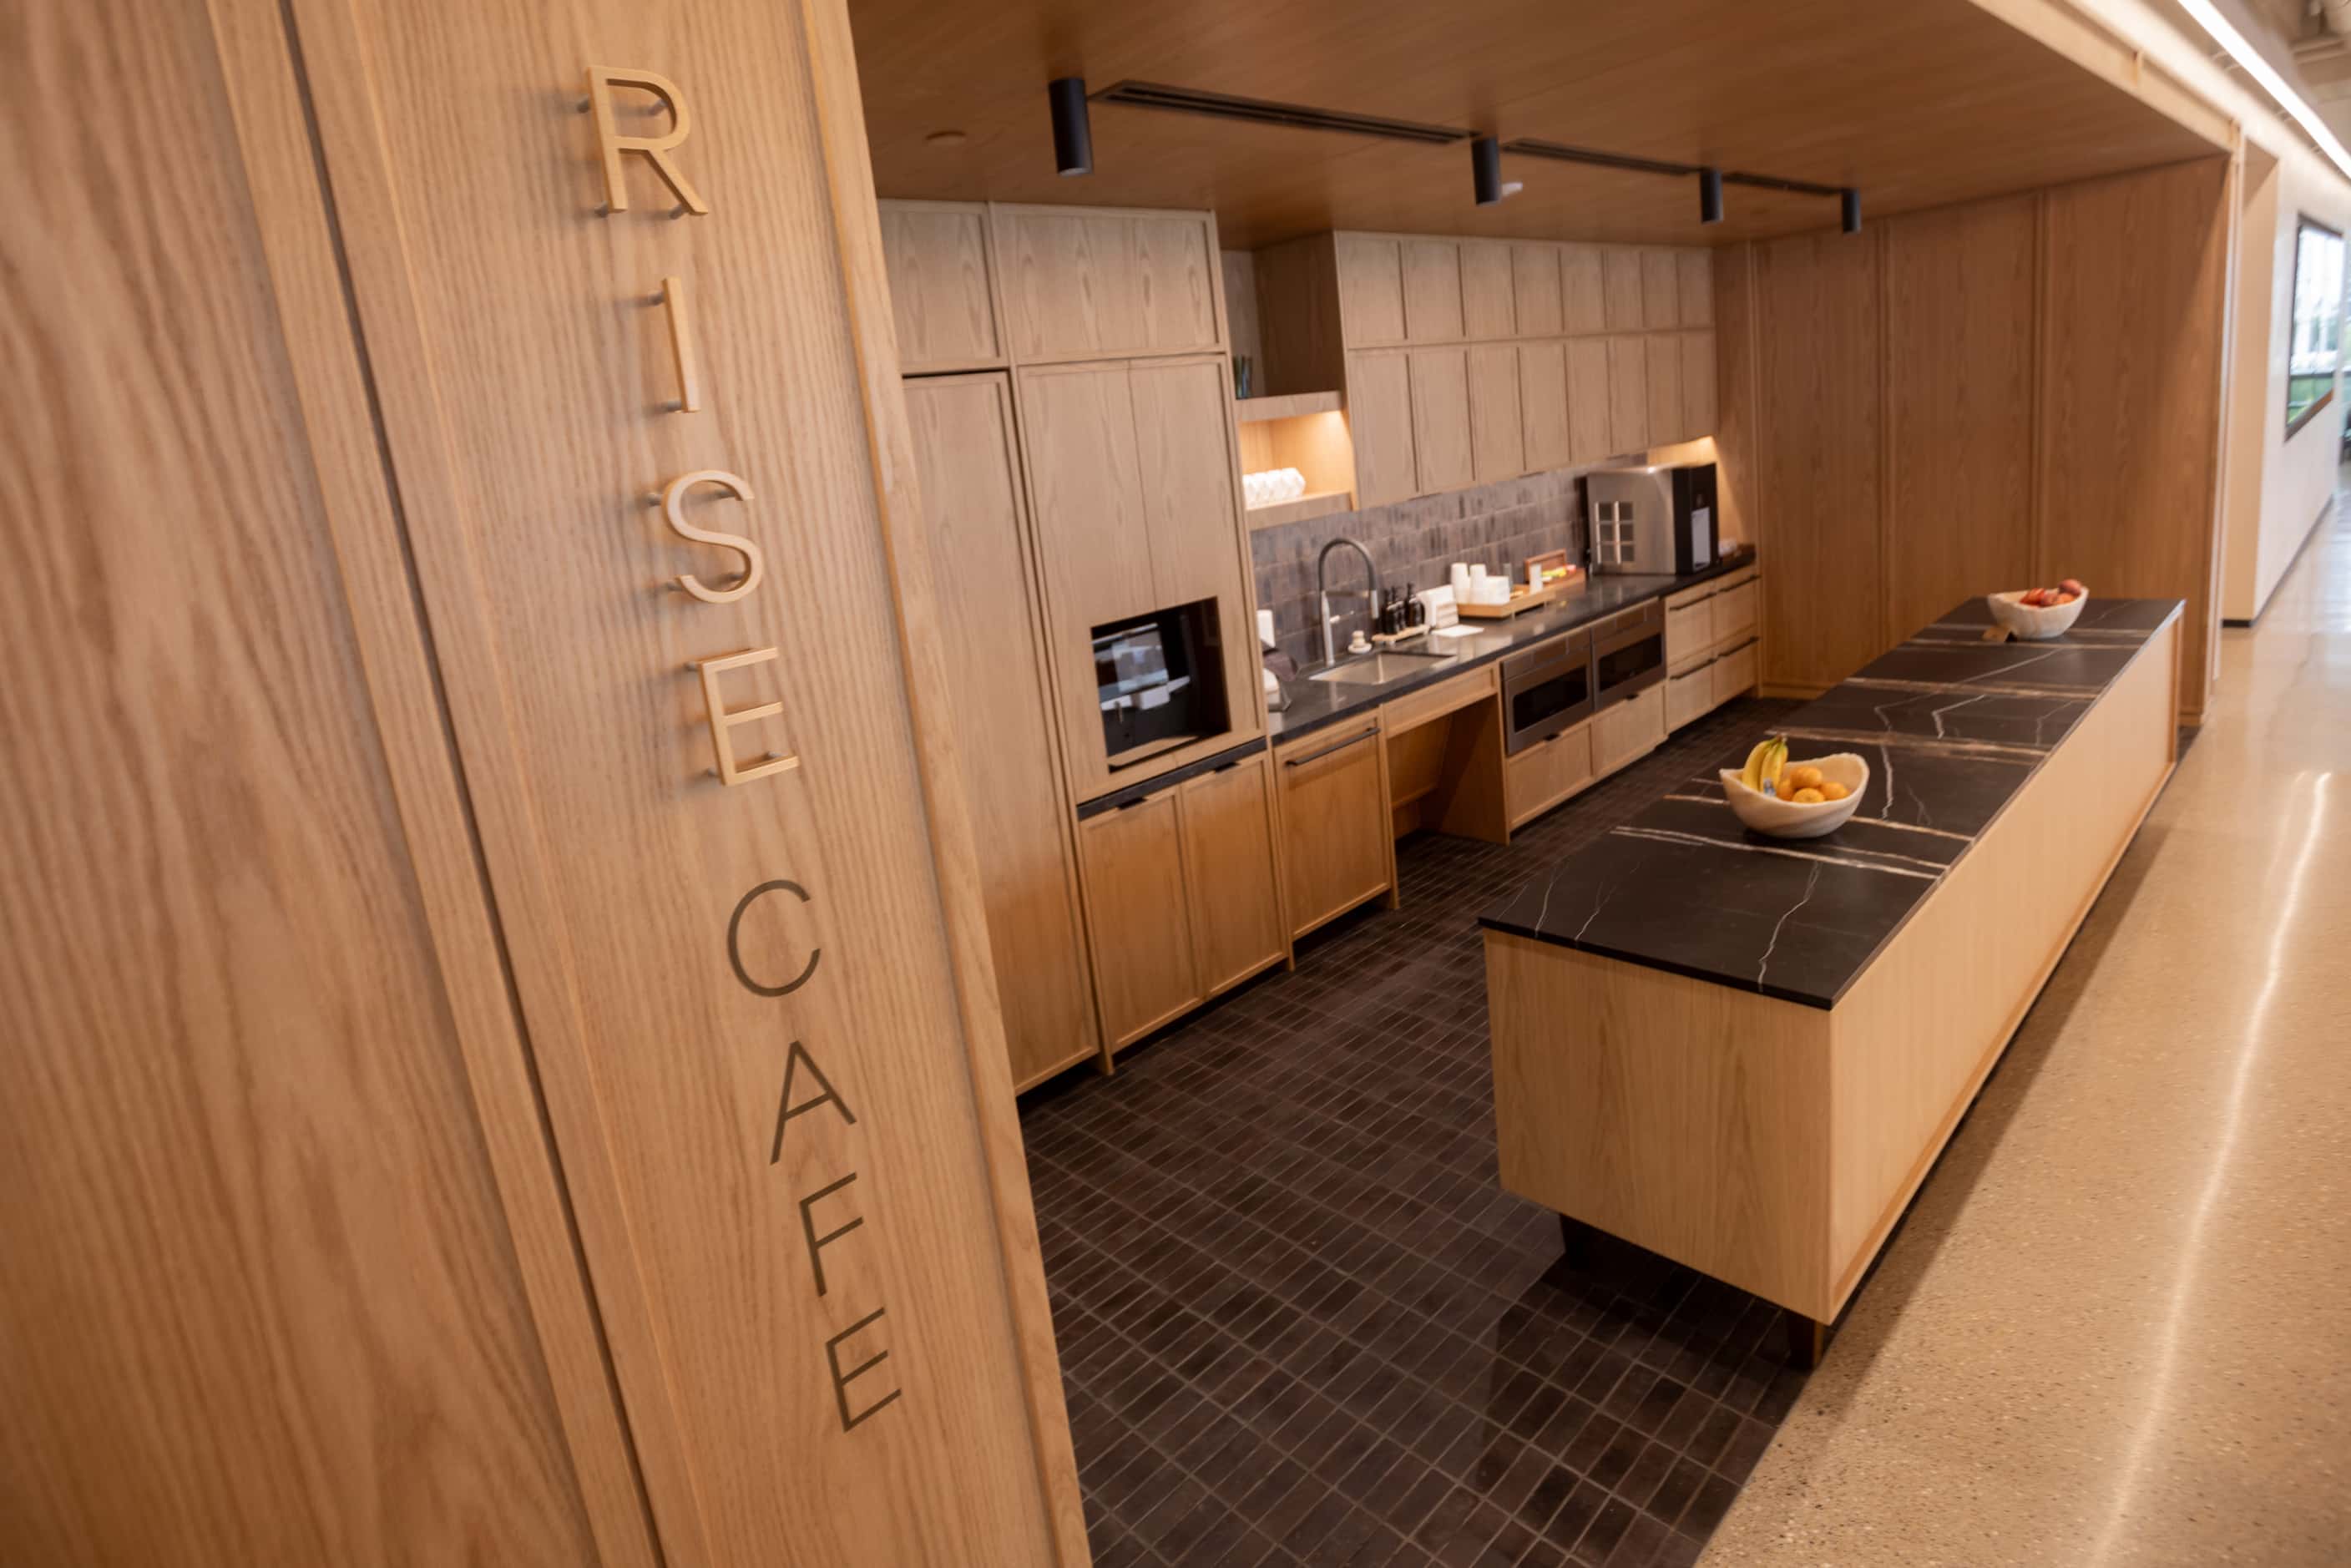 The RISE Café area at CBRE’s new global headquarters is stocked daily through a partnership...